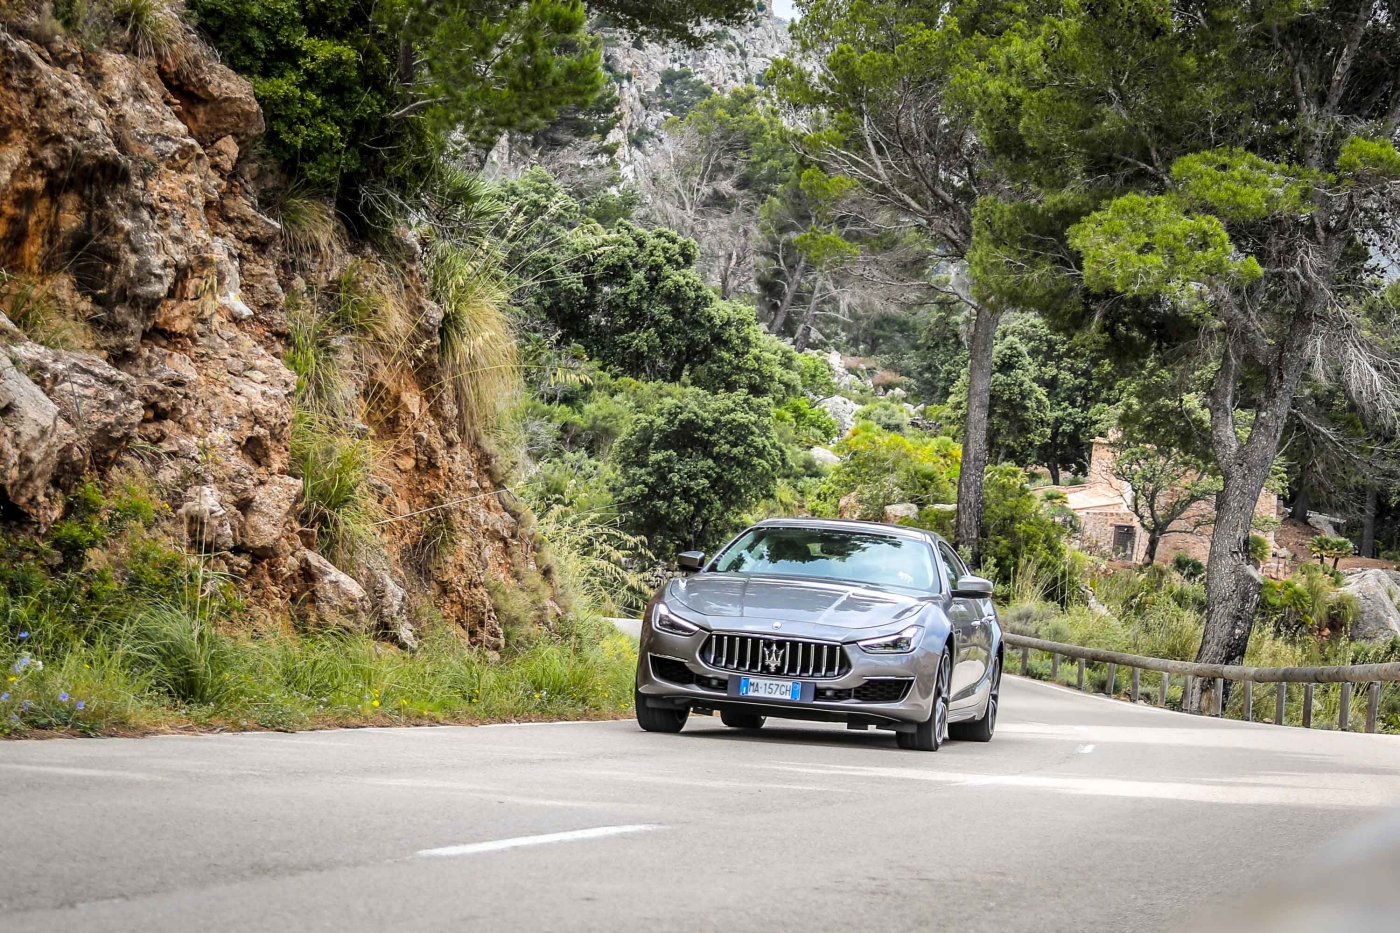 Maserati Ghibli riding on road with trees